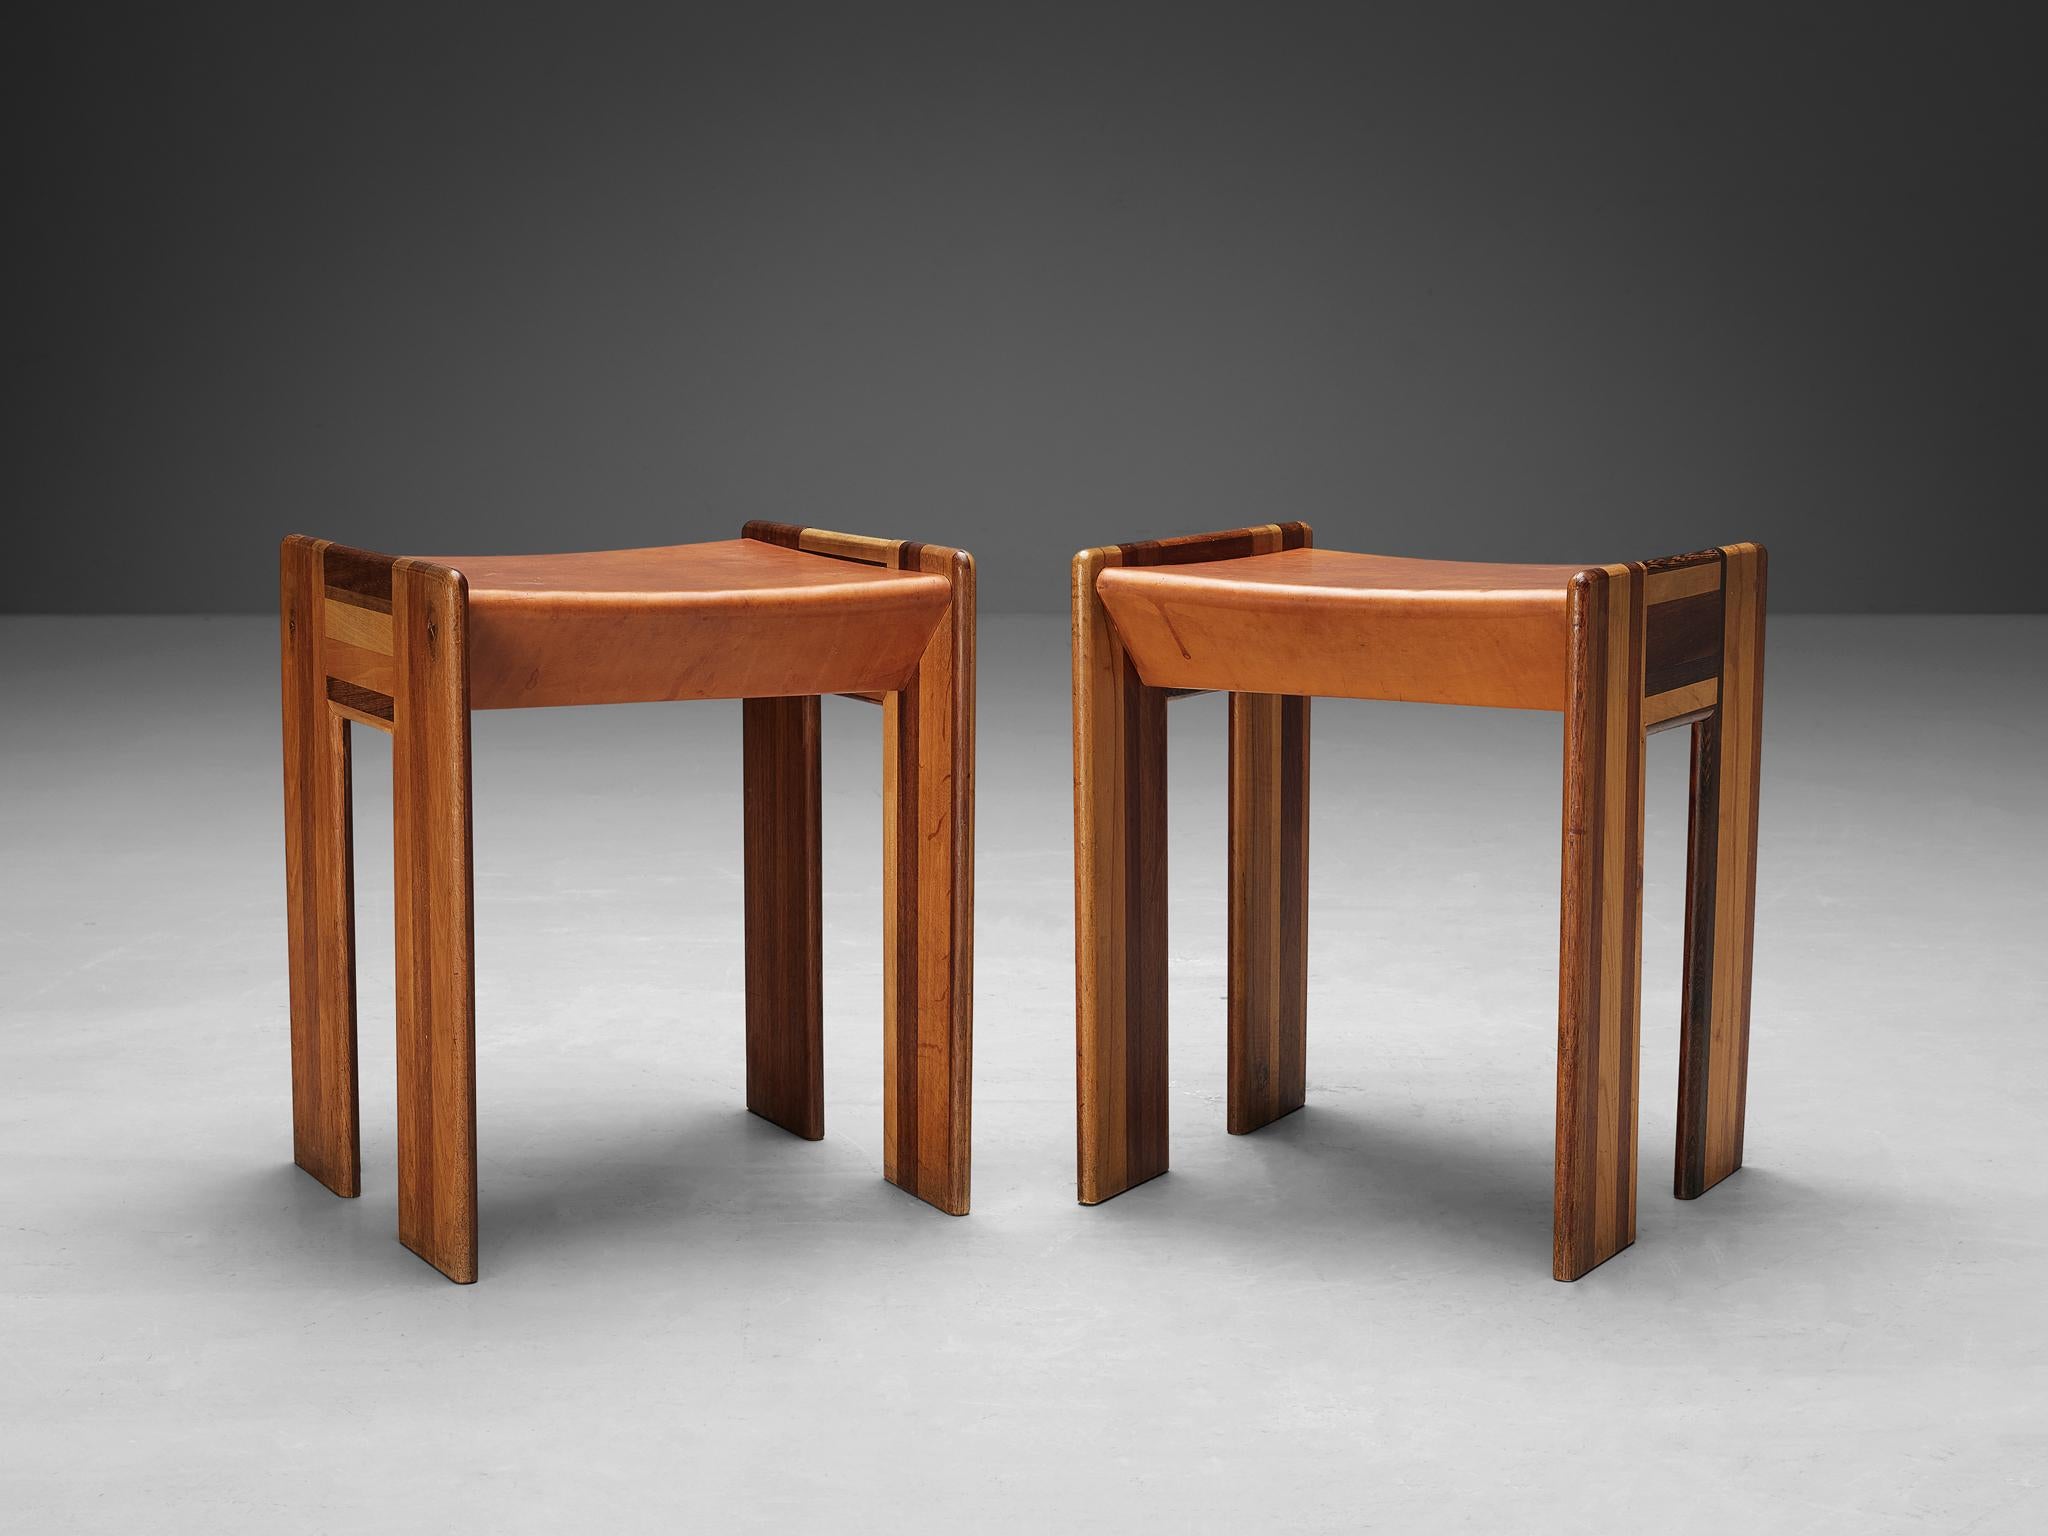 Afra & Tobia Scarpa 'Benetton' Stools in Mixed Wood and Cognac Leather For Sale 4